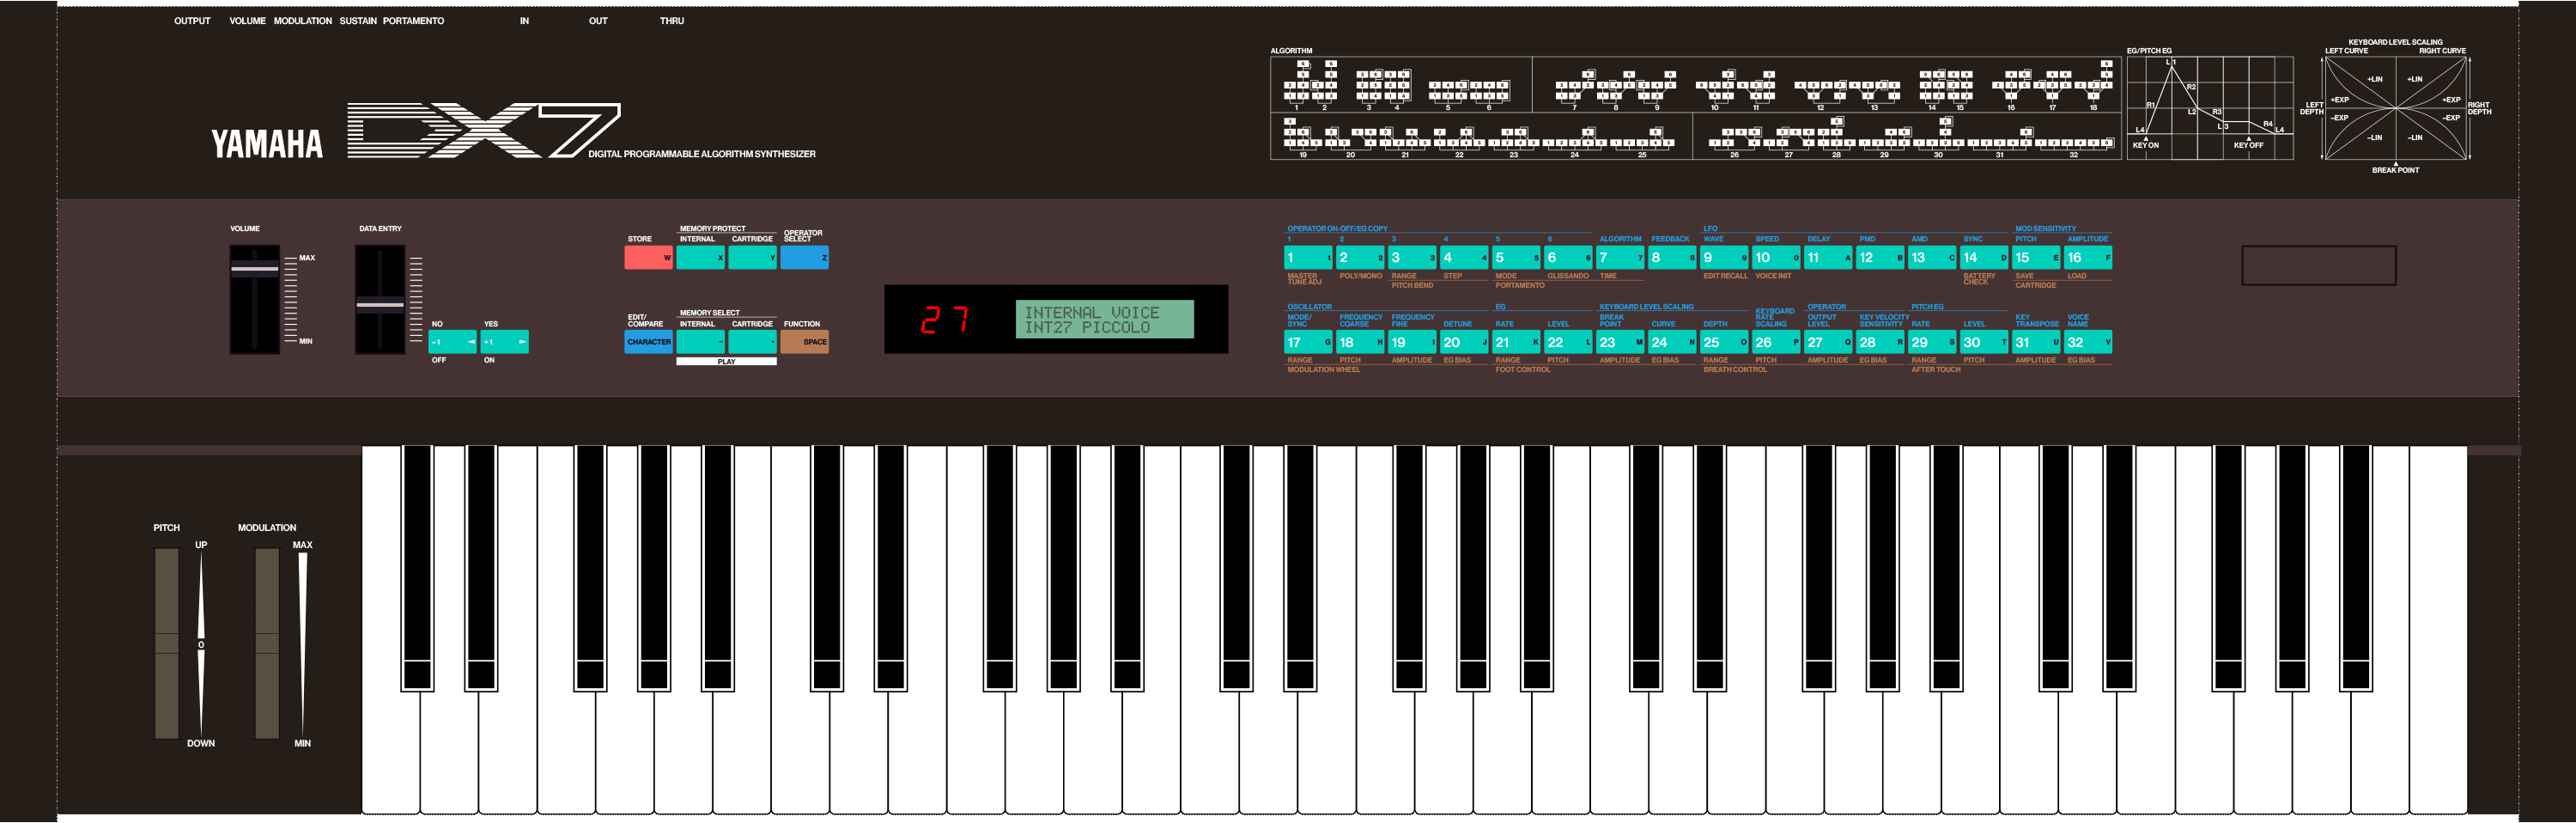 dx7 patches